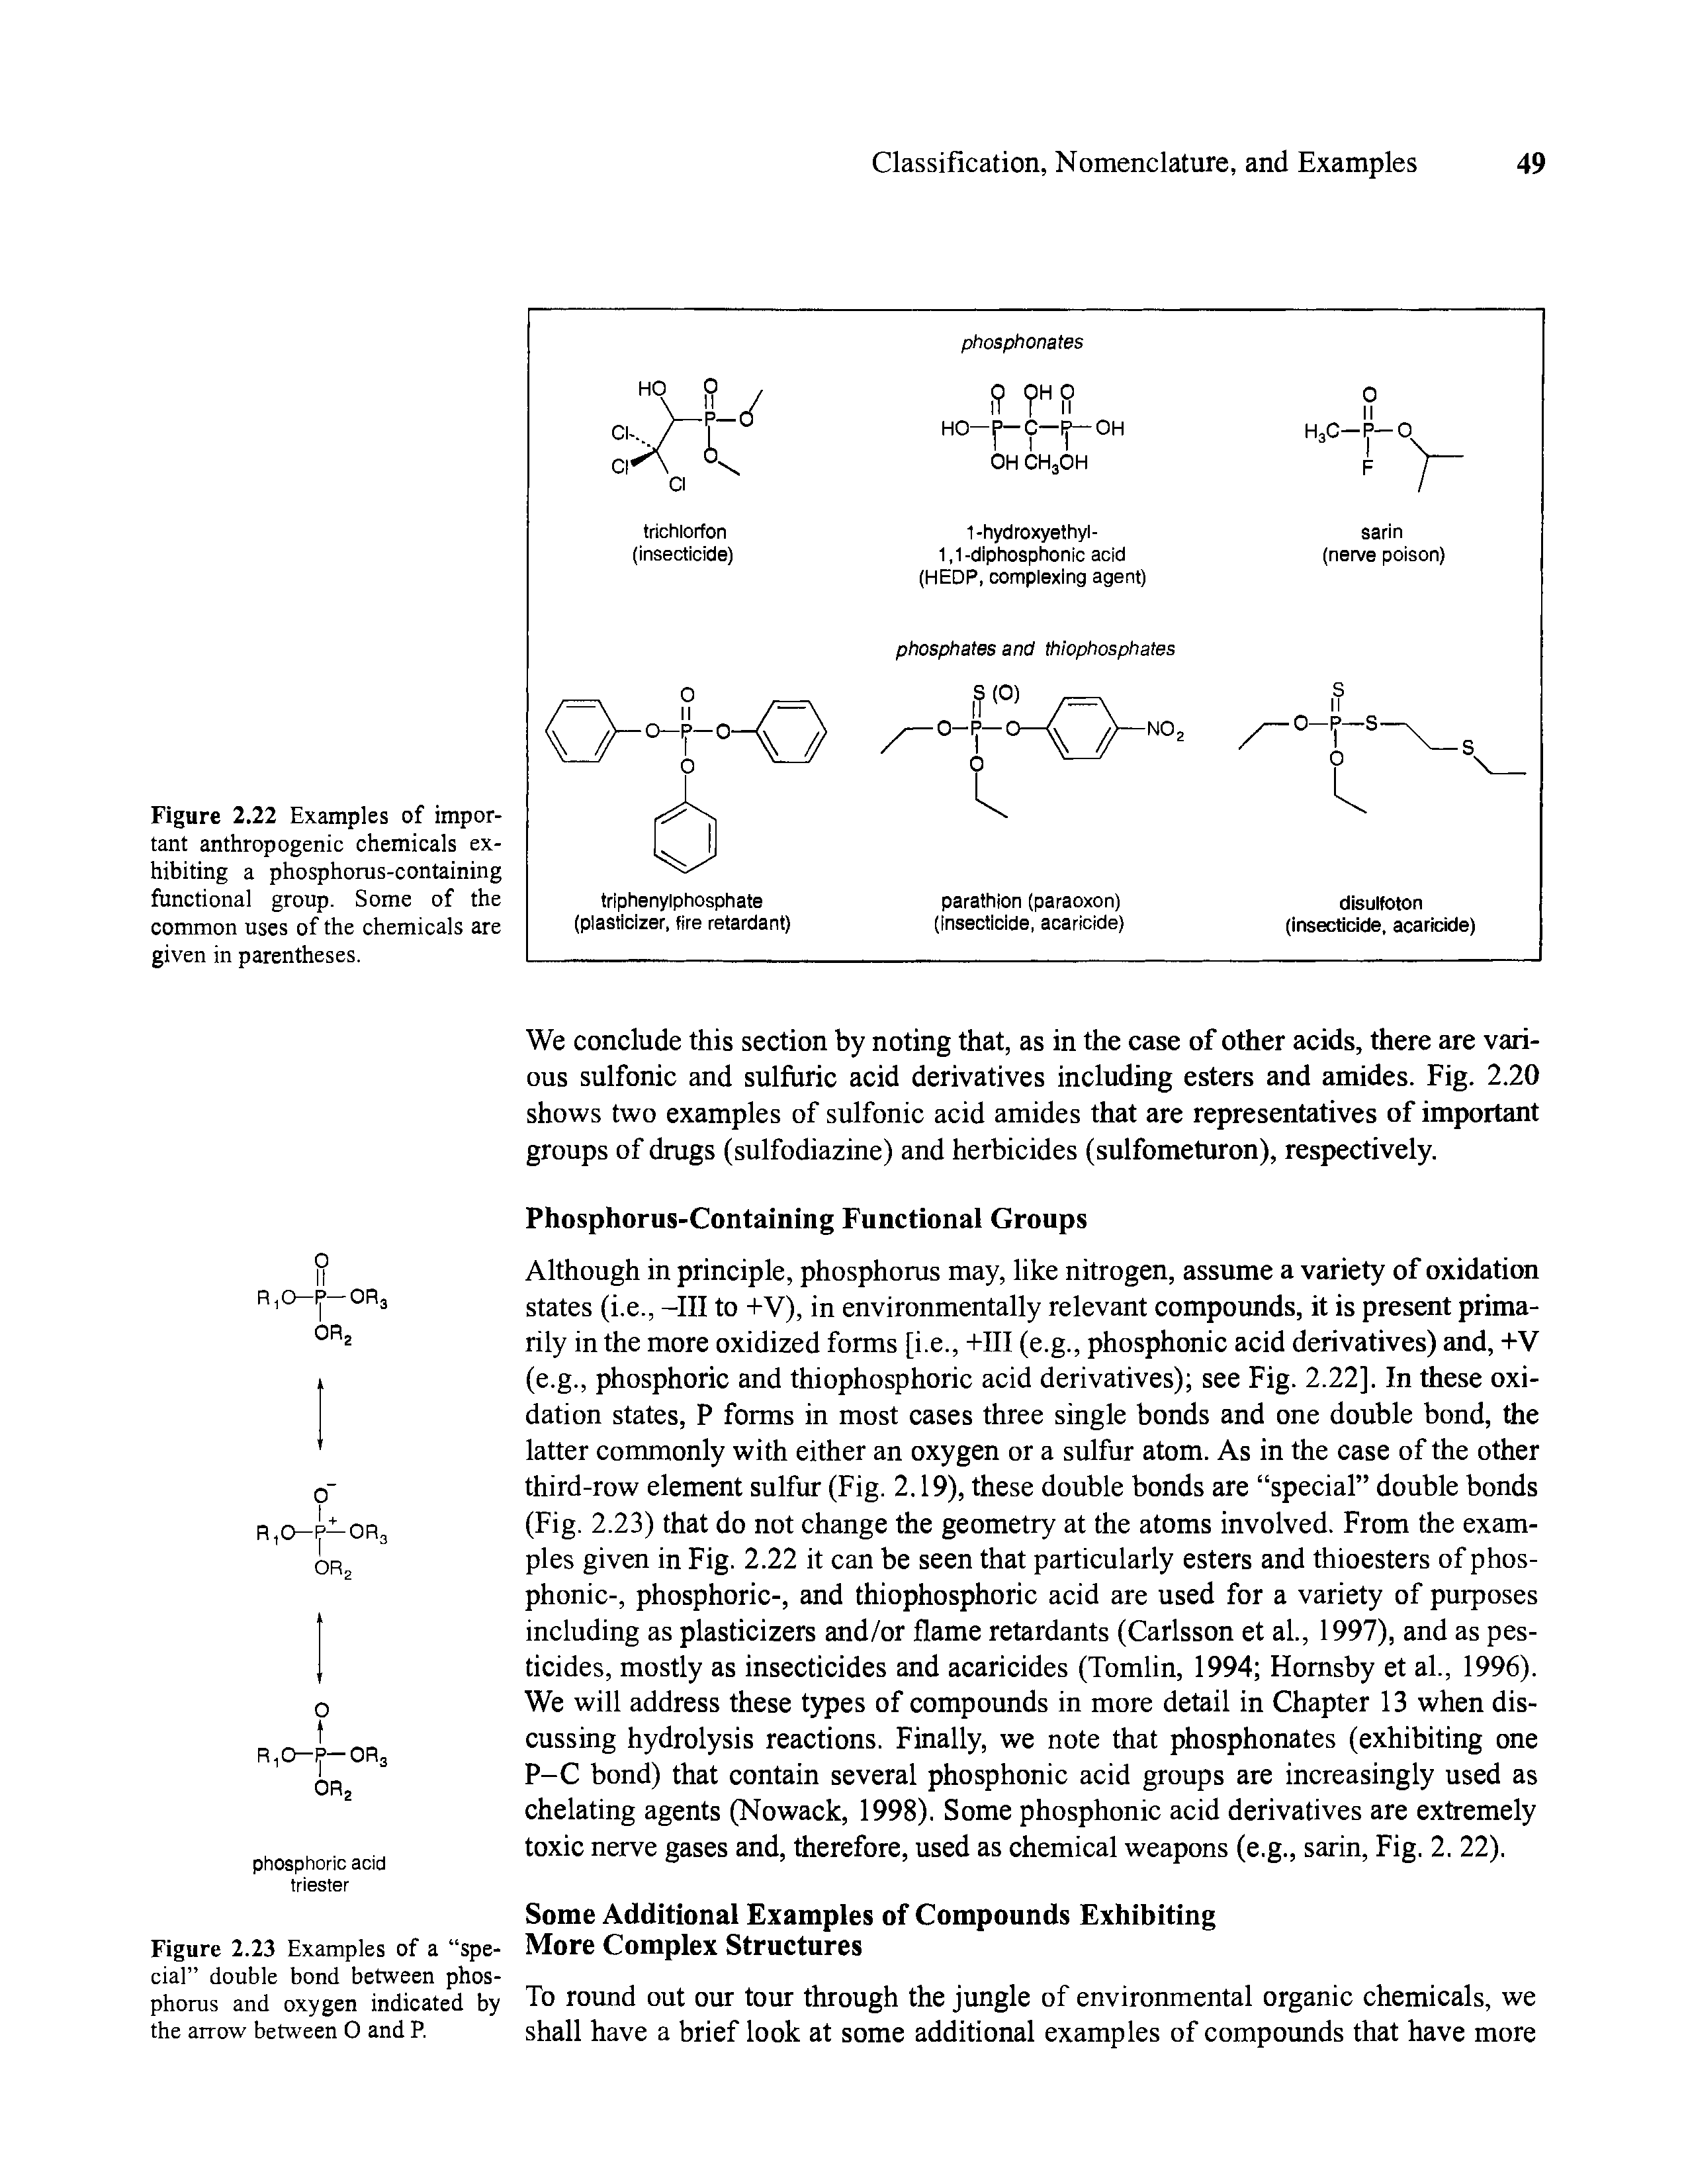 Figure 2.22 Examples of important anthropogenic chemicals exhibiting a phosphorus-containing functional group. Some of the common uses of the chemicals are given in parentheses.